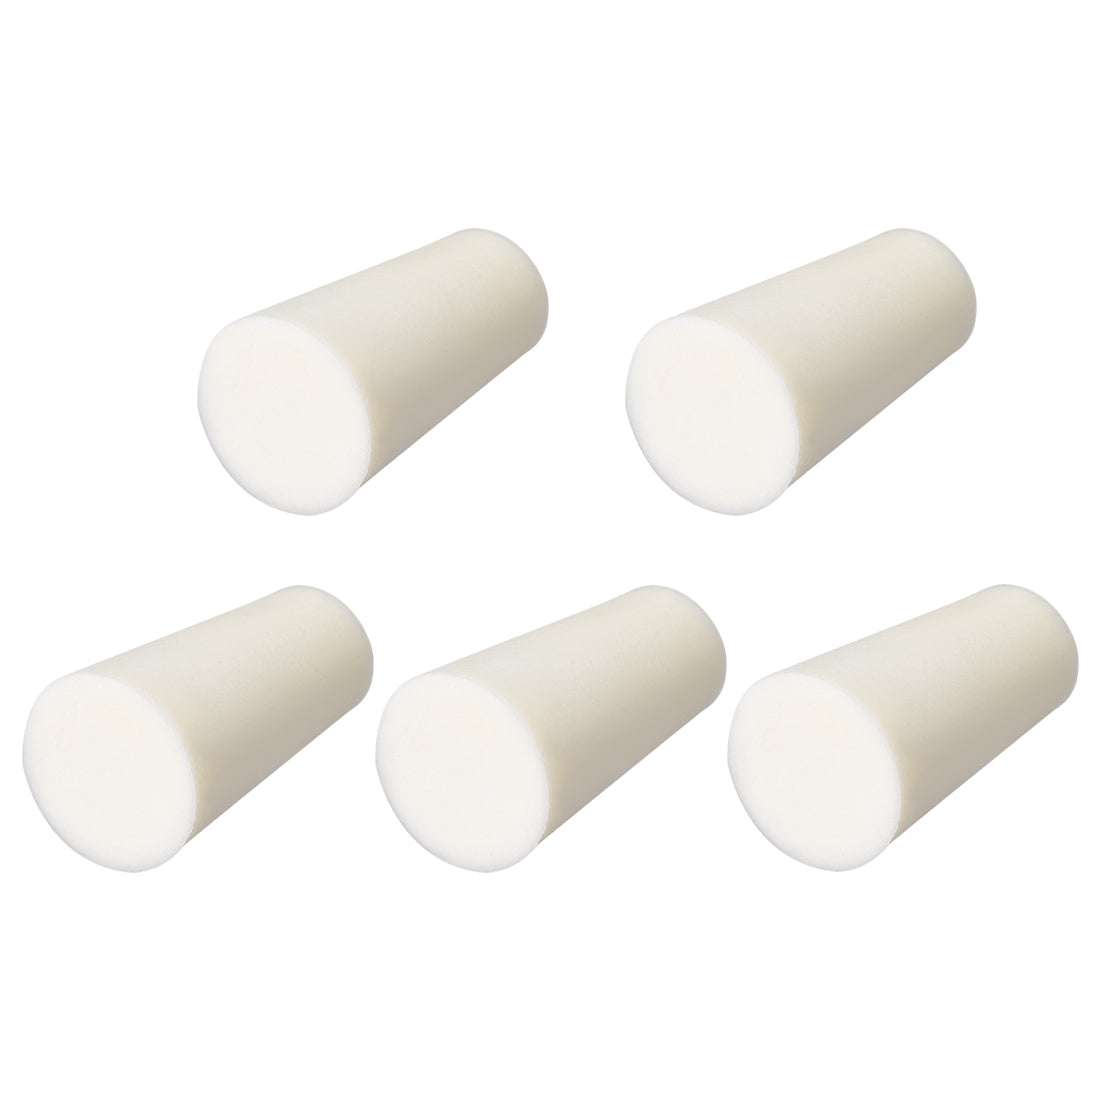 uxcell Uxcell 12-17mm Beige Drilled Silicone Stopper Plugs for Flask Test Tube Stopper 5pcs